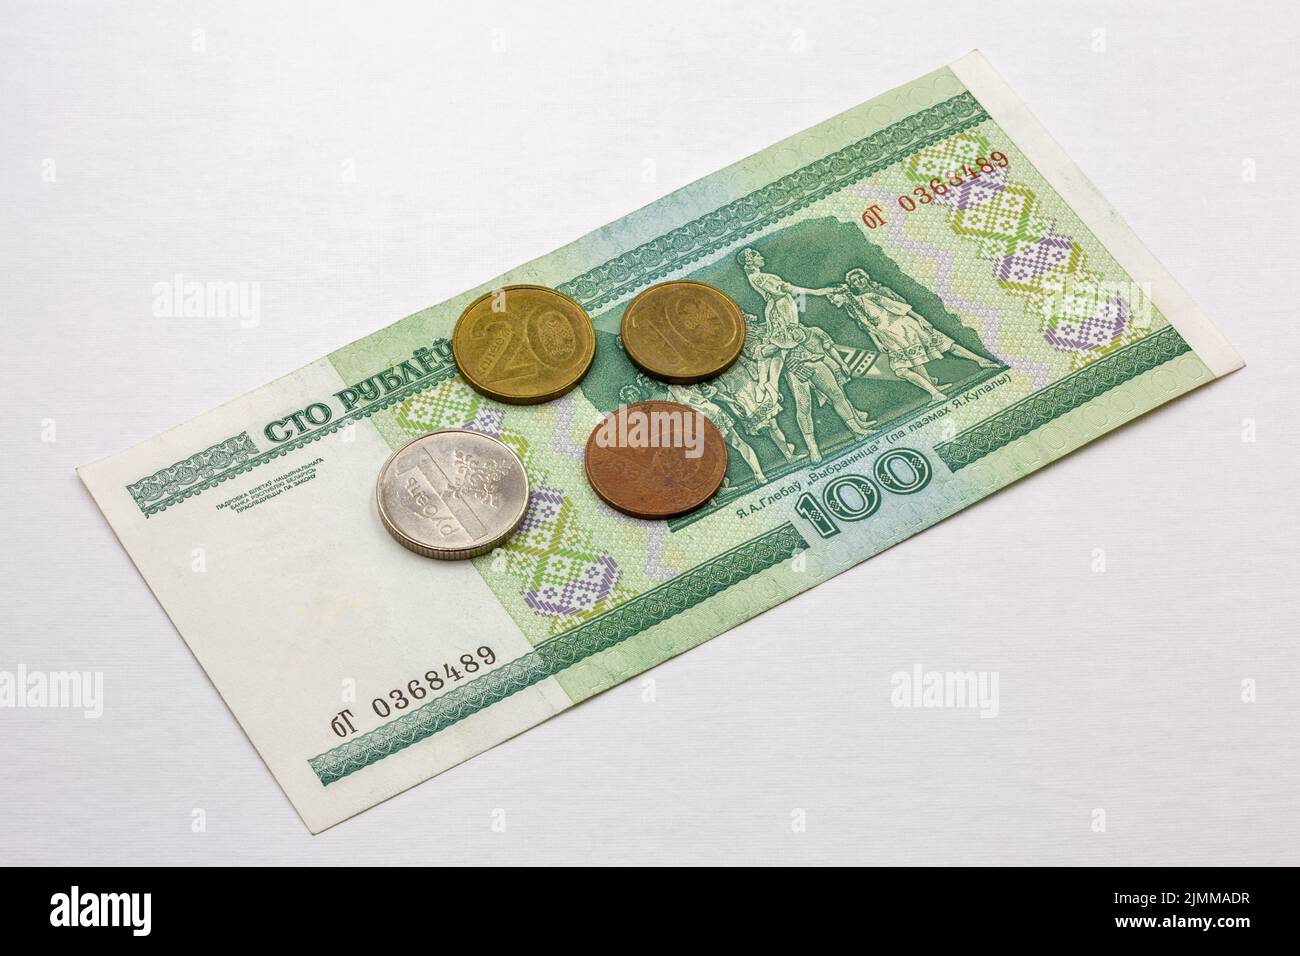 Belarusian paper money banknote and coins closeup against white Stock Photo